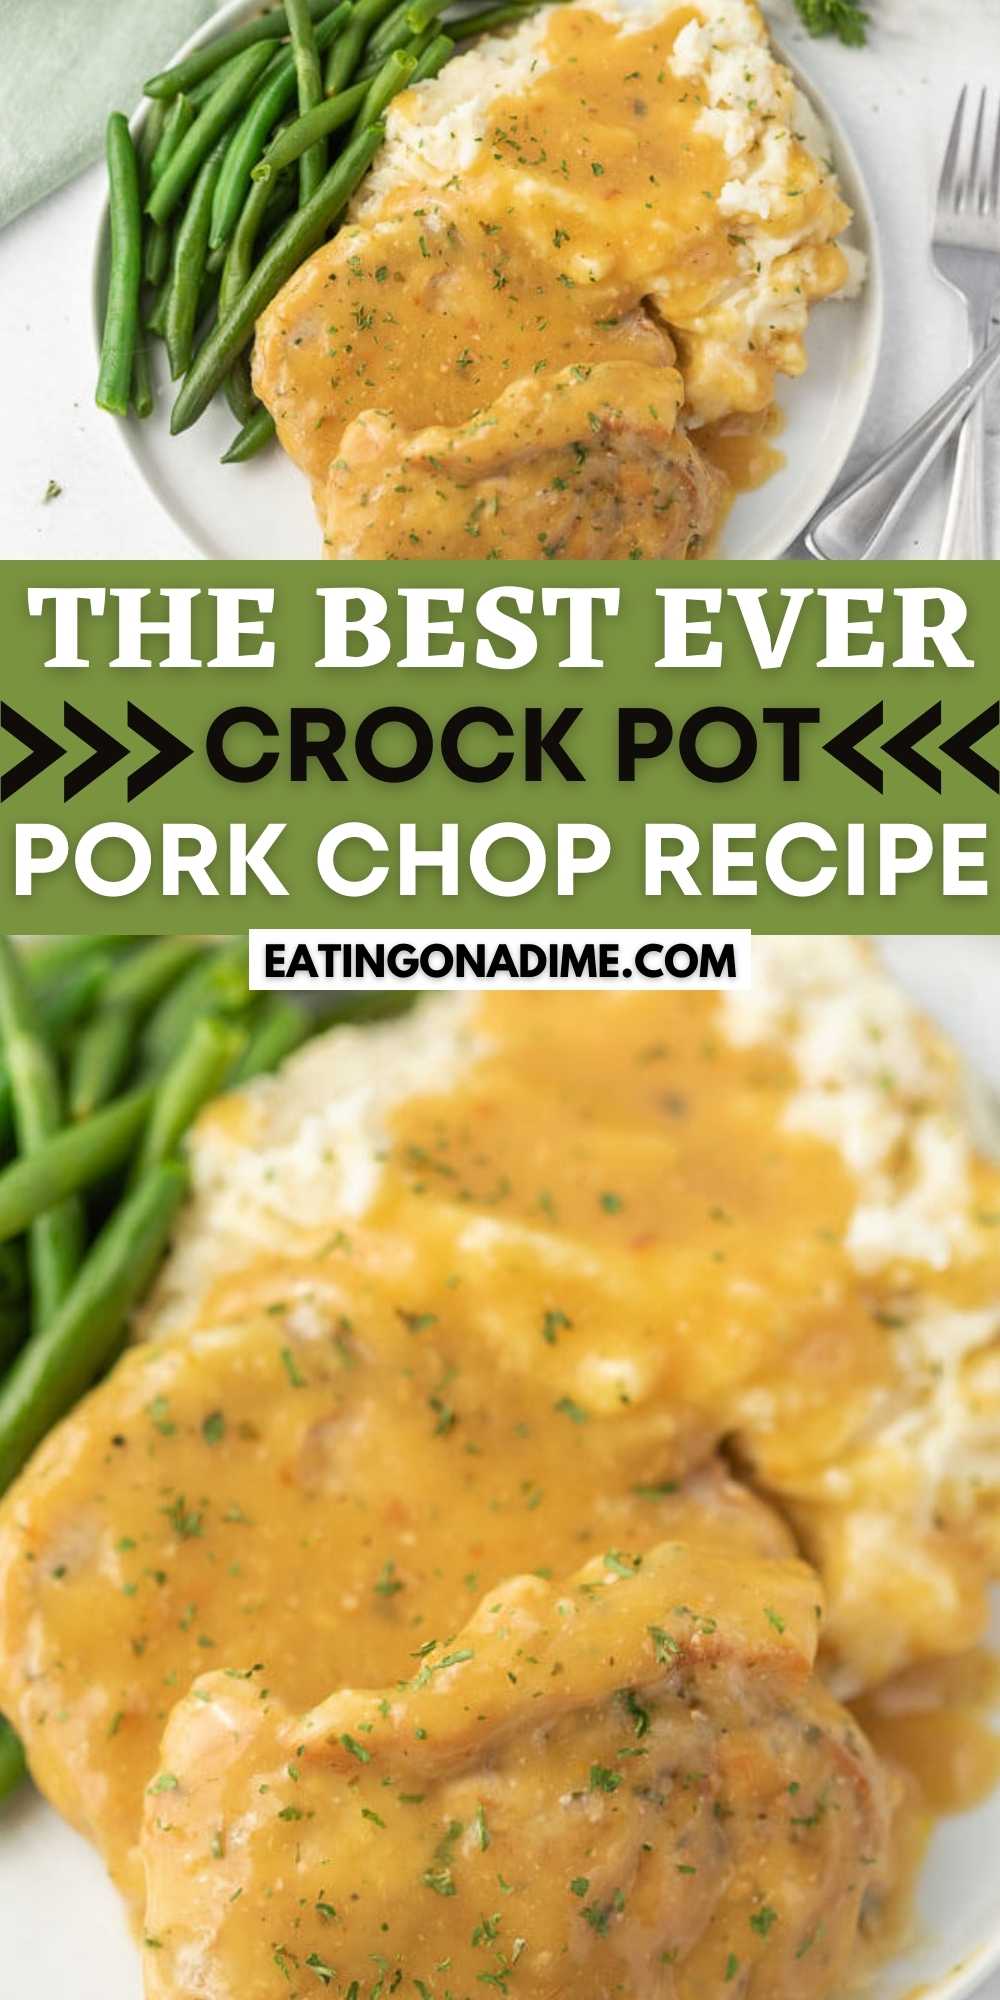 Easy Crock Pot pork chops is such a simple recipe. This recipe for easy pork chop with chicken soup cream comes out tender and delicious. This is a family favorite. Everyone loves these slow-cooked pork chops with sauce. #eatingonadime #crockpotrecipes #slowcookerrecipes #porkrecipes